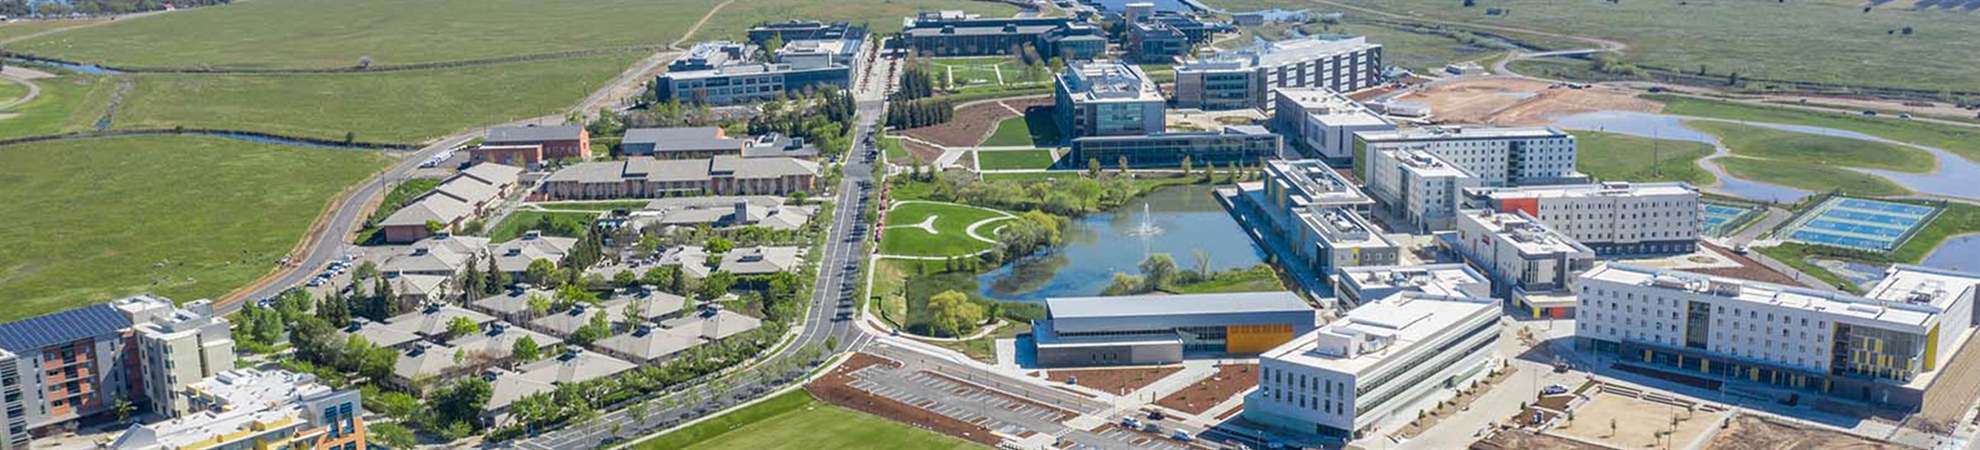 UC Merced Aerial Picture